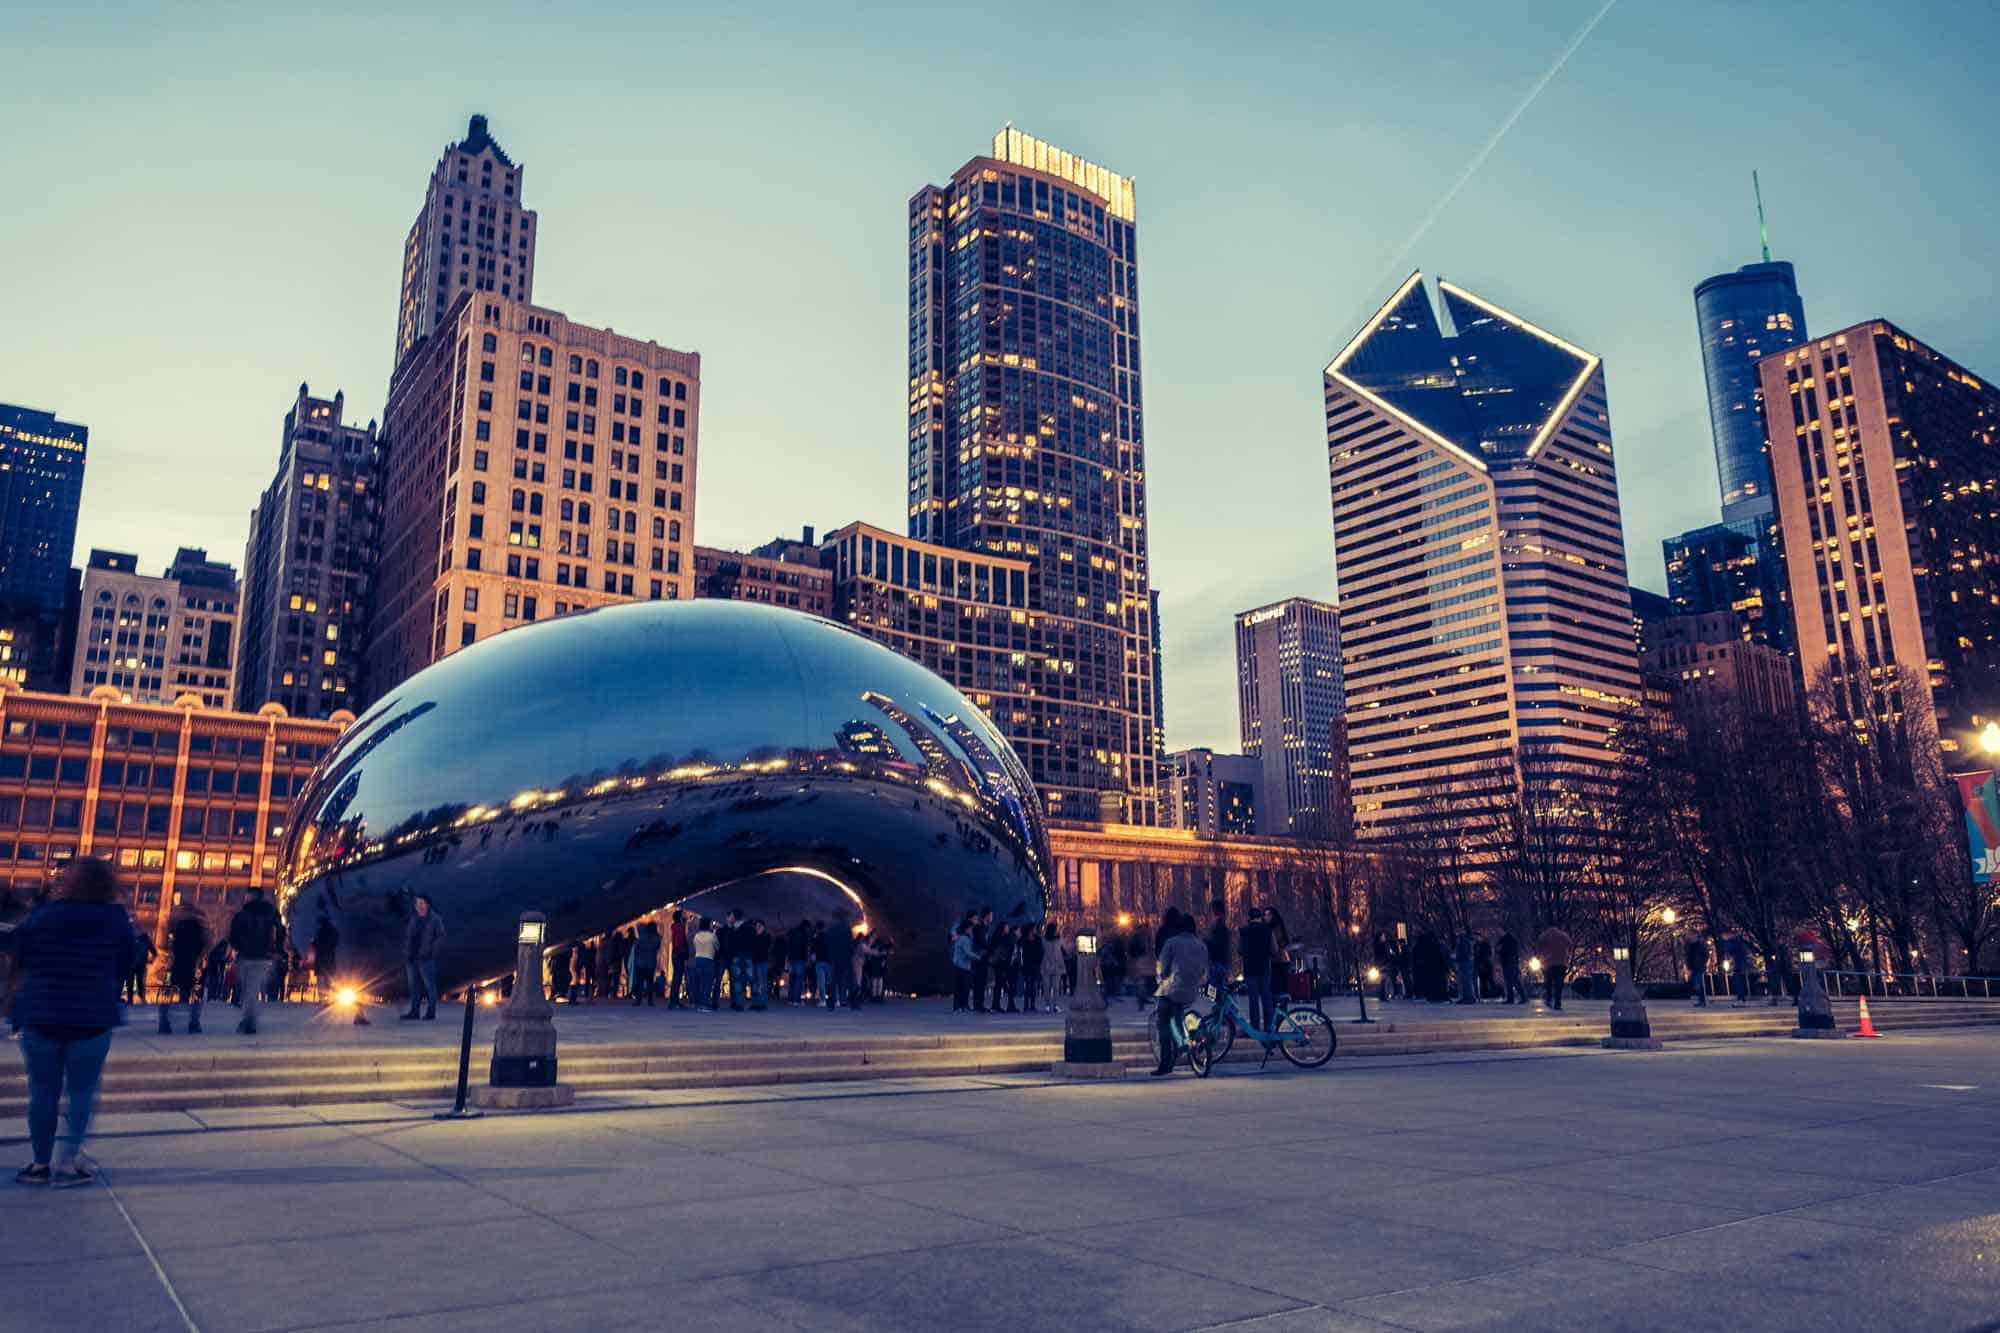 Our 3 Days In Chicago Itinerary